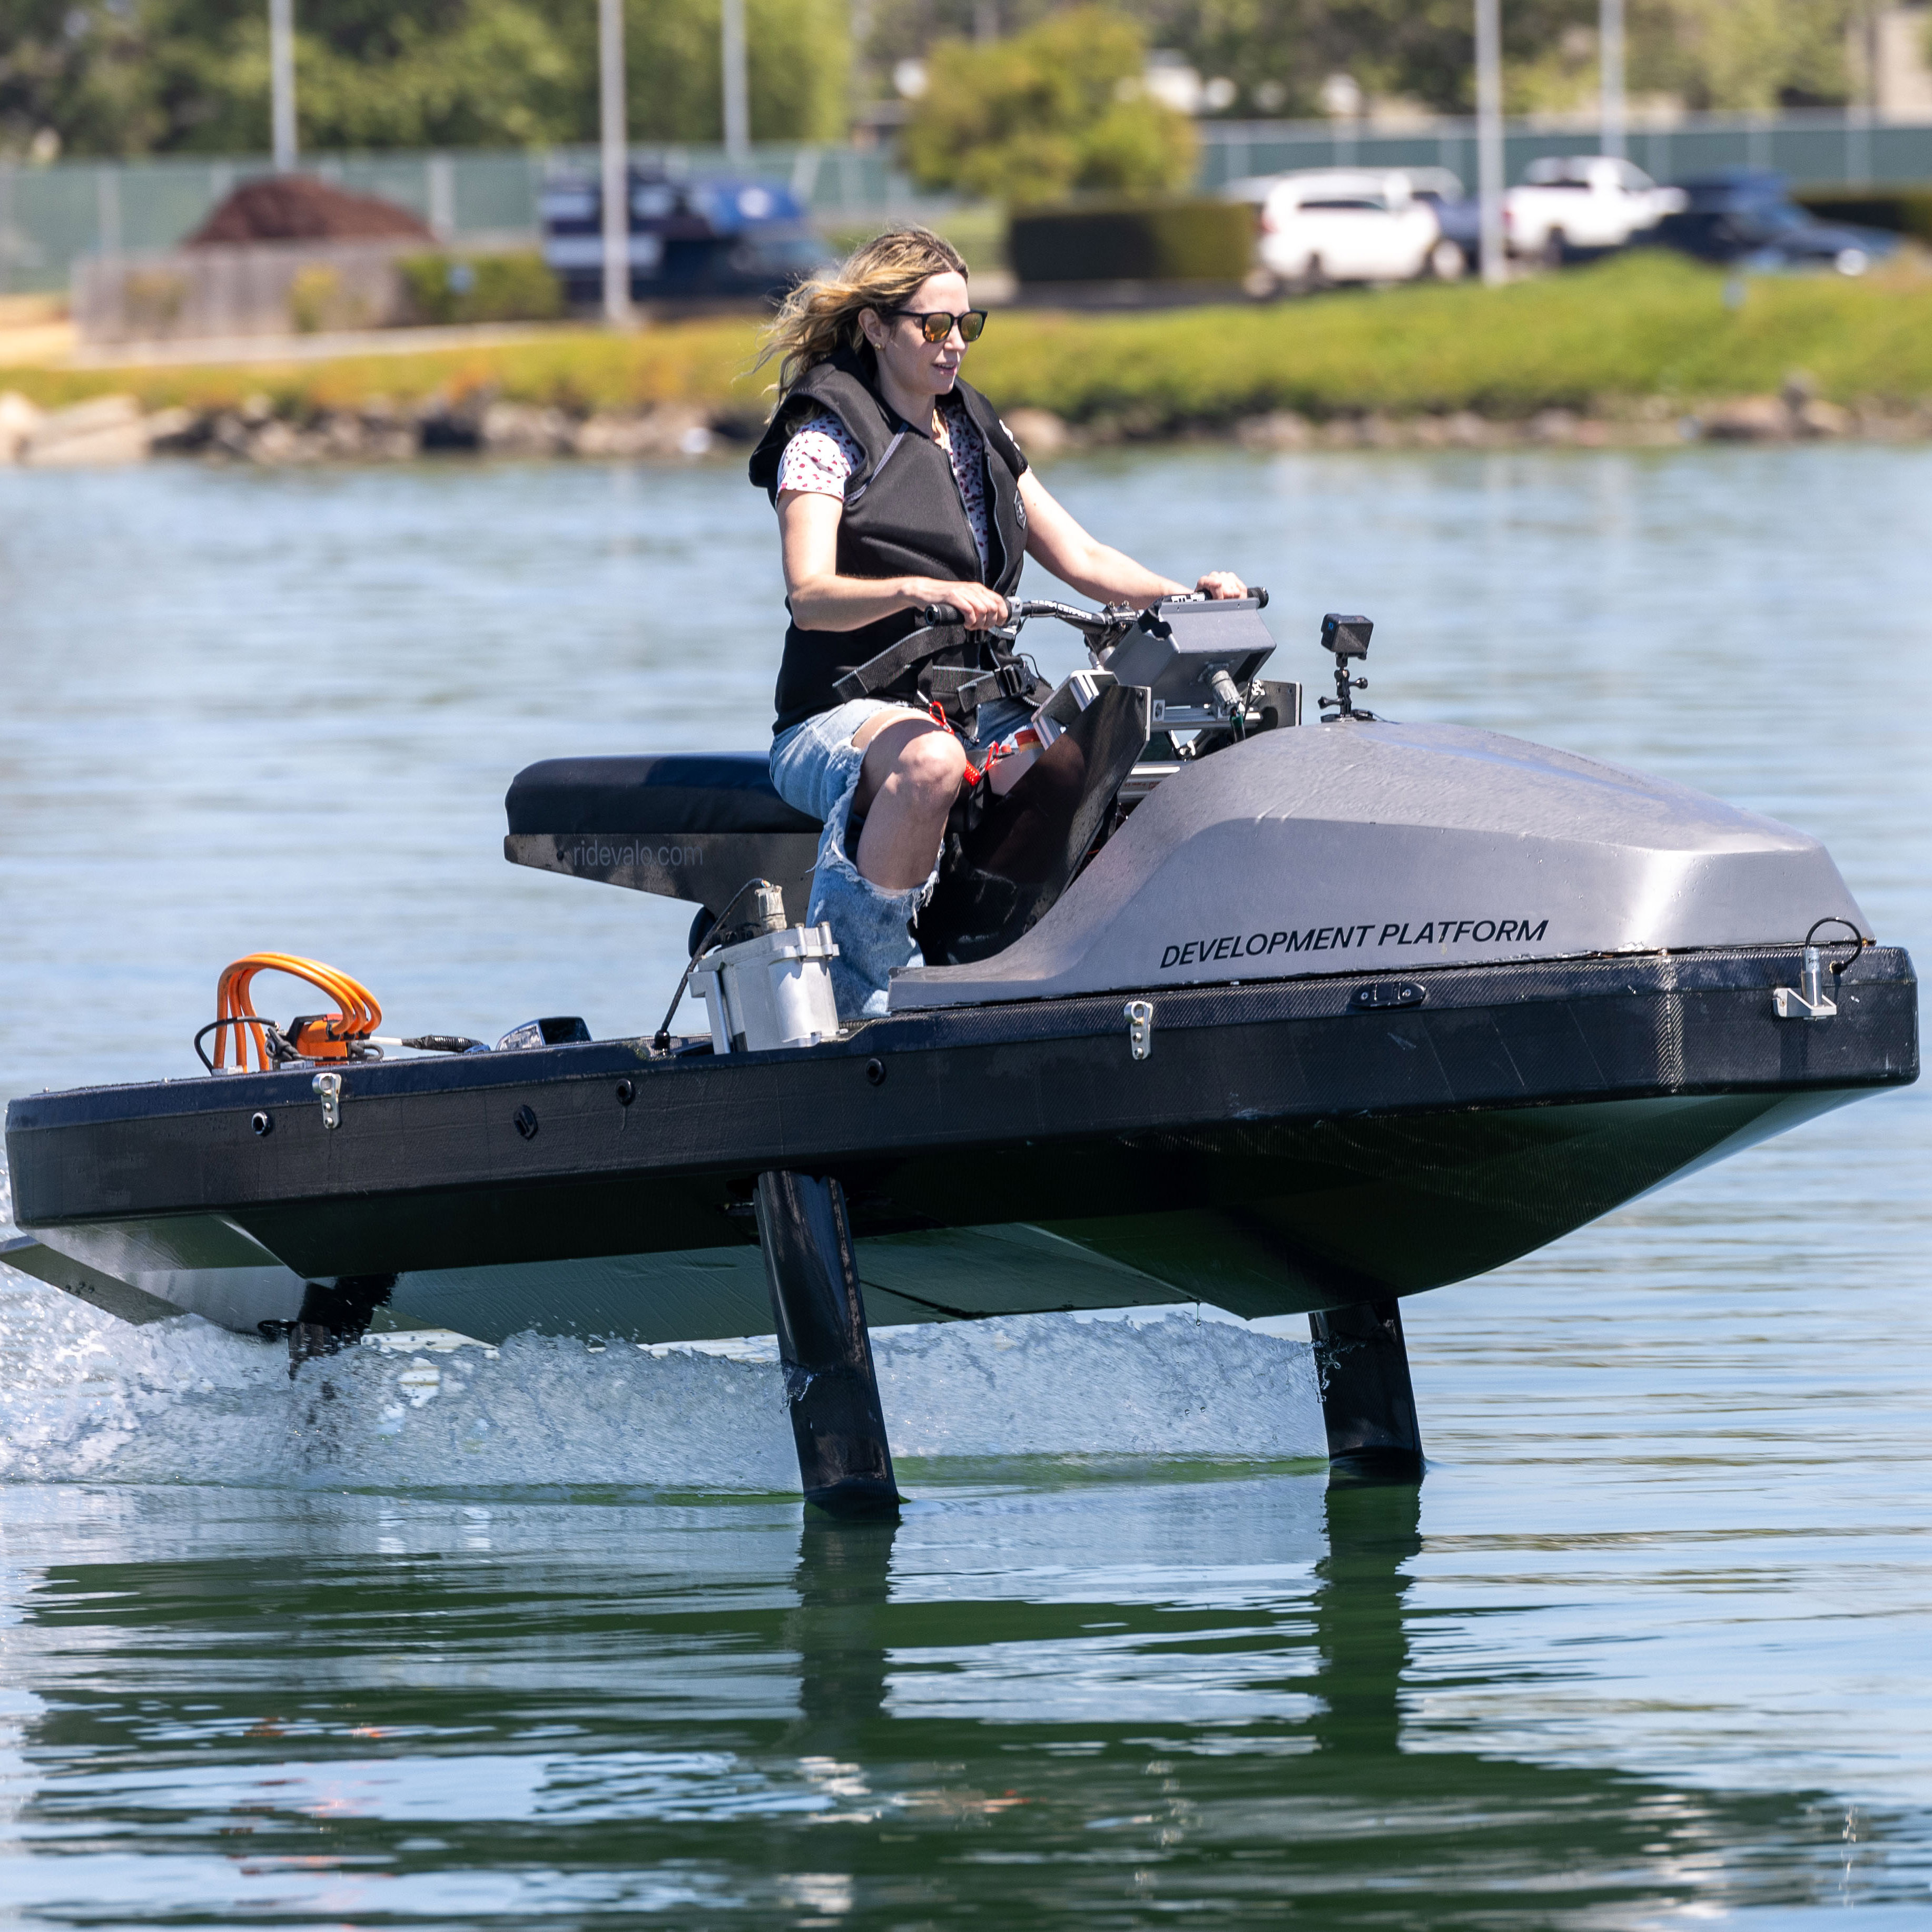 A person in sunglasses and a life jacket is riding a futuristic-looking watercraft labeled "DEVELOPMENT PLATFORM" on a calm body of water.